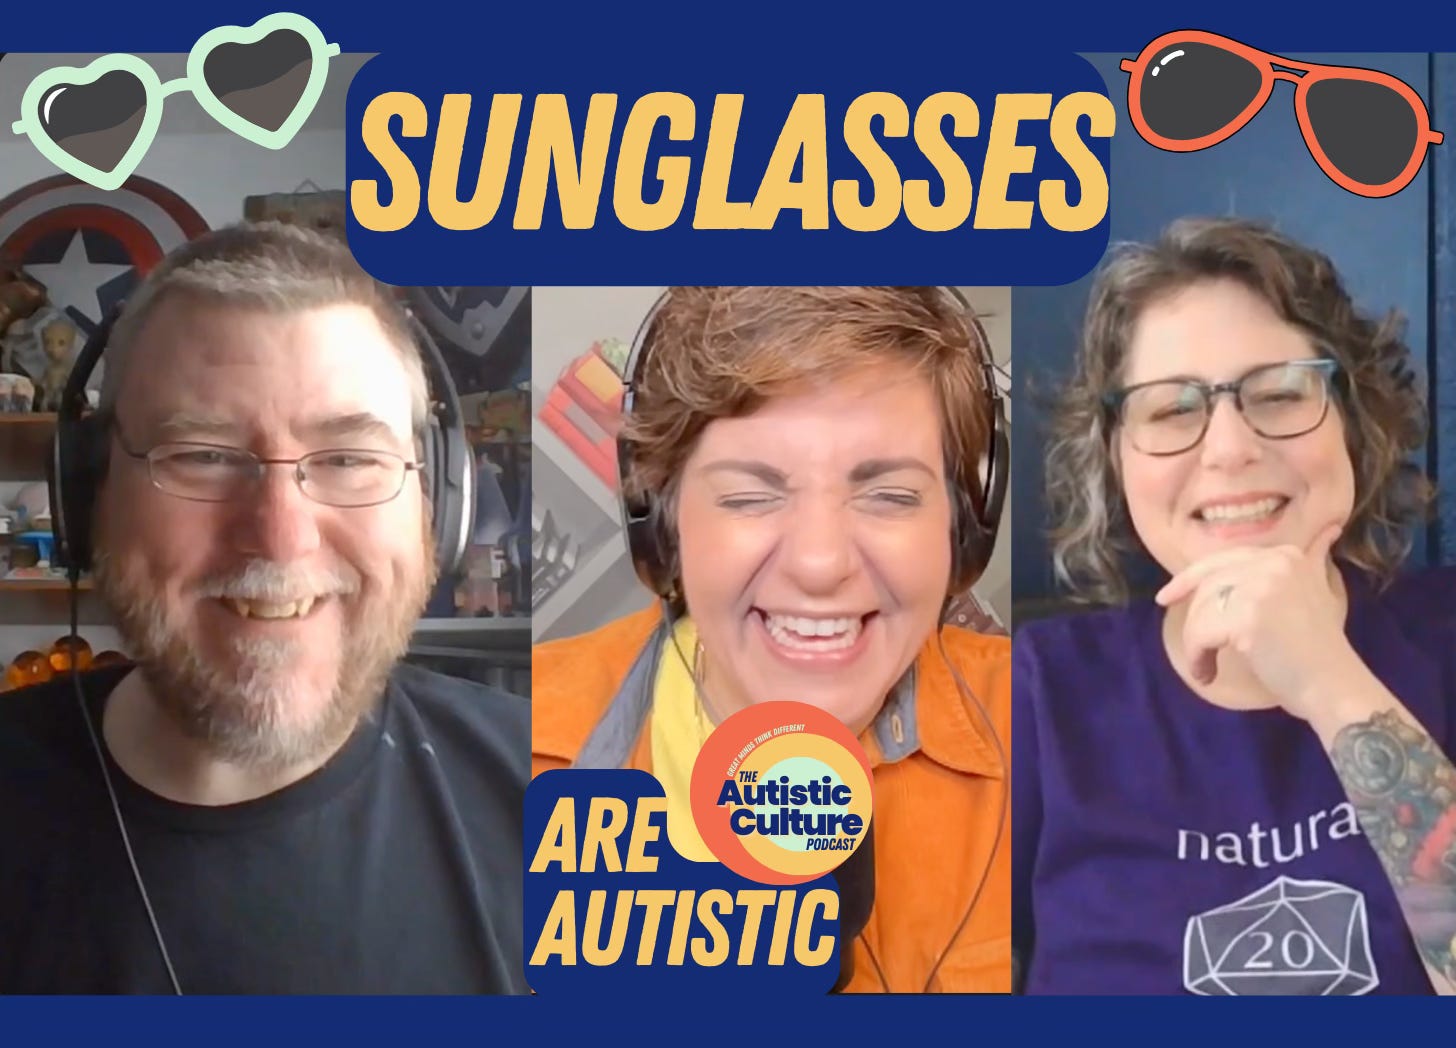 Two autistic podcast hosts, Dr. Angela Lauria and Matt Lowry, LPP, are joined by Becca Lory Hector, autistic author for a podcast interview. The title is called: Sunglasses are autistic.